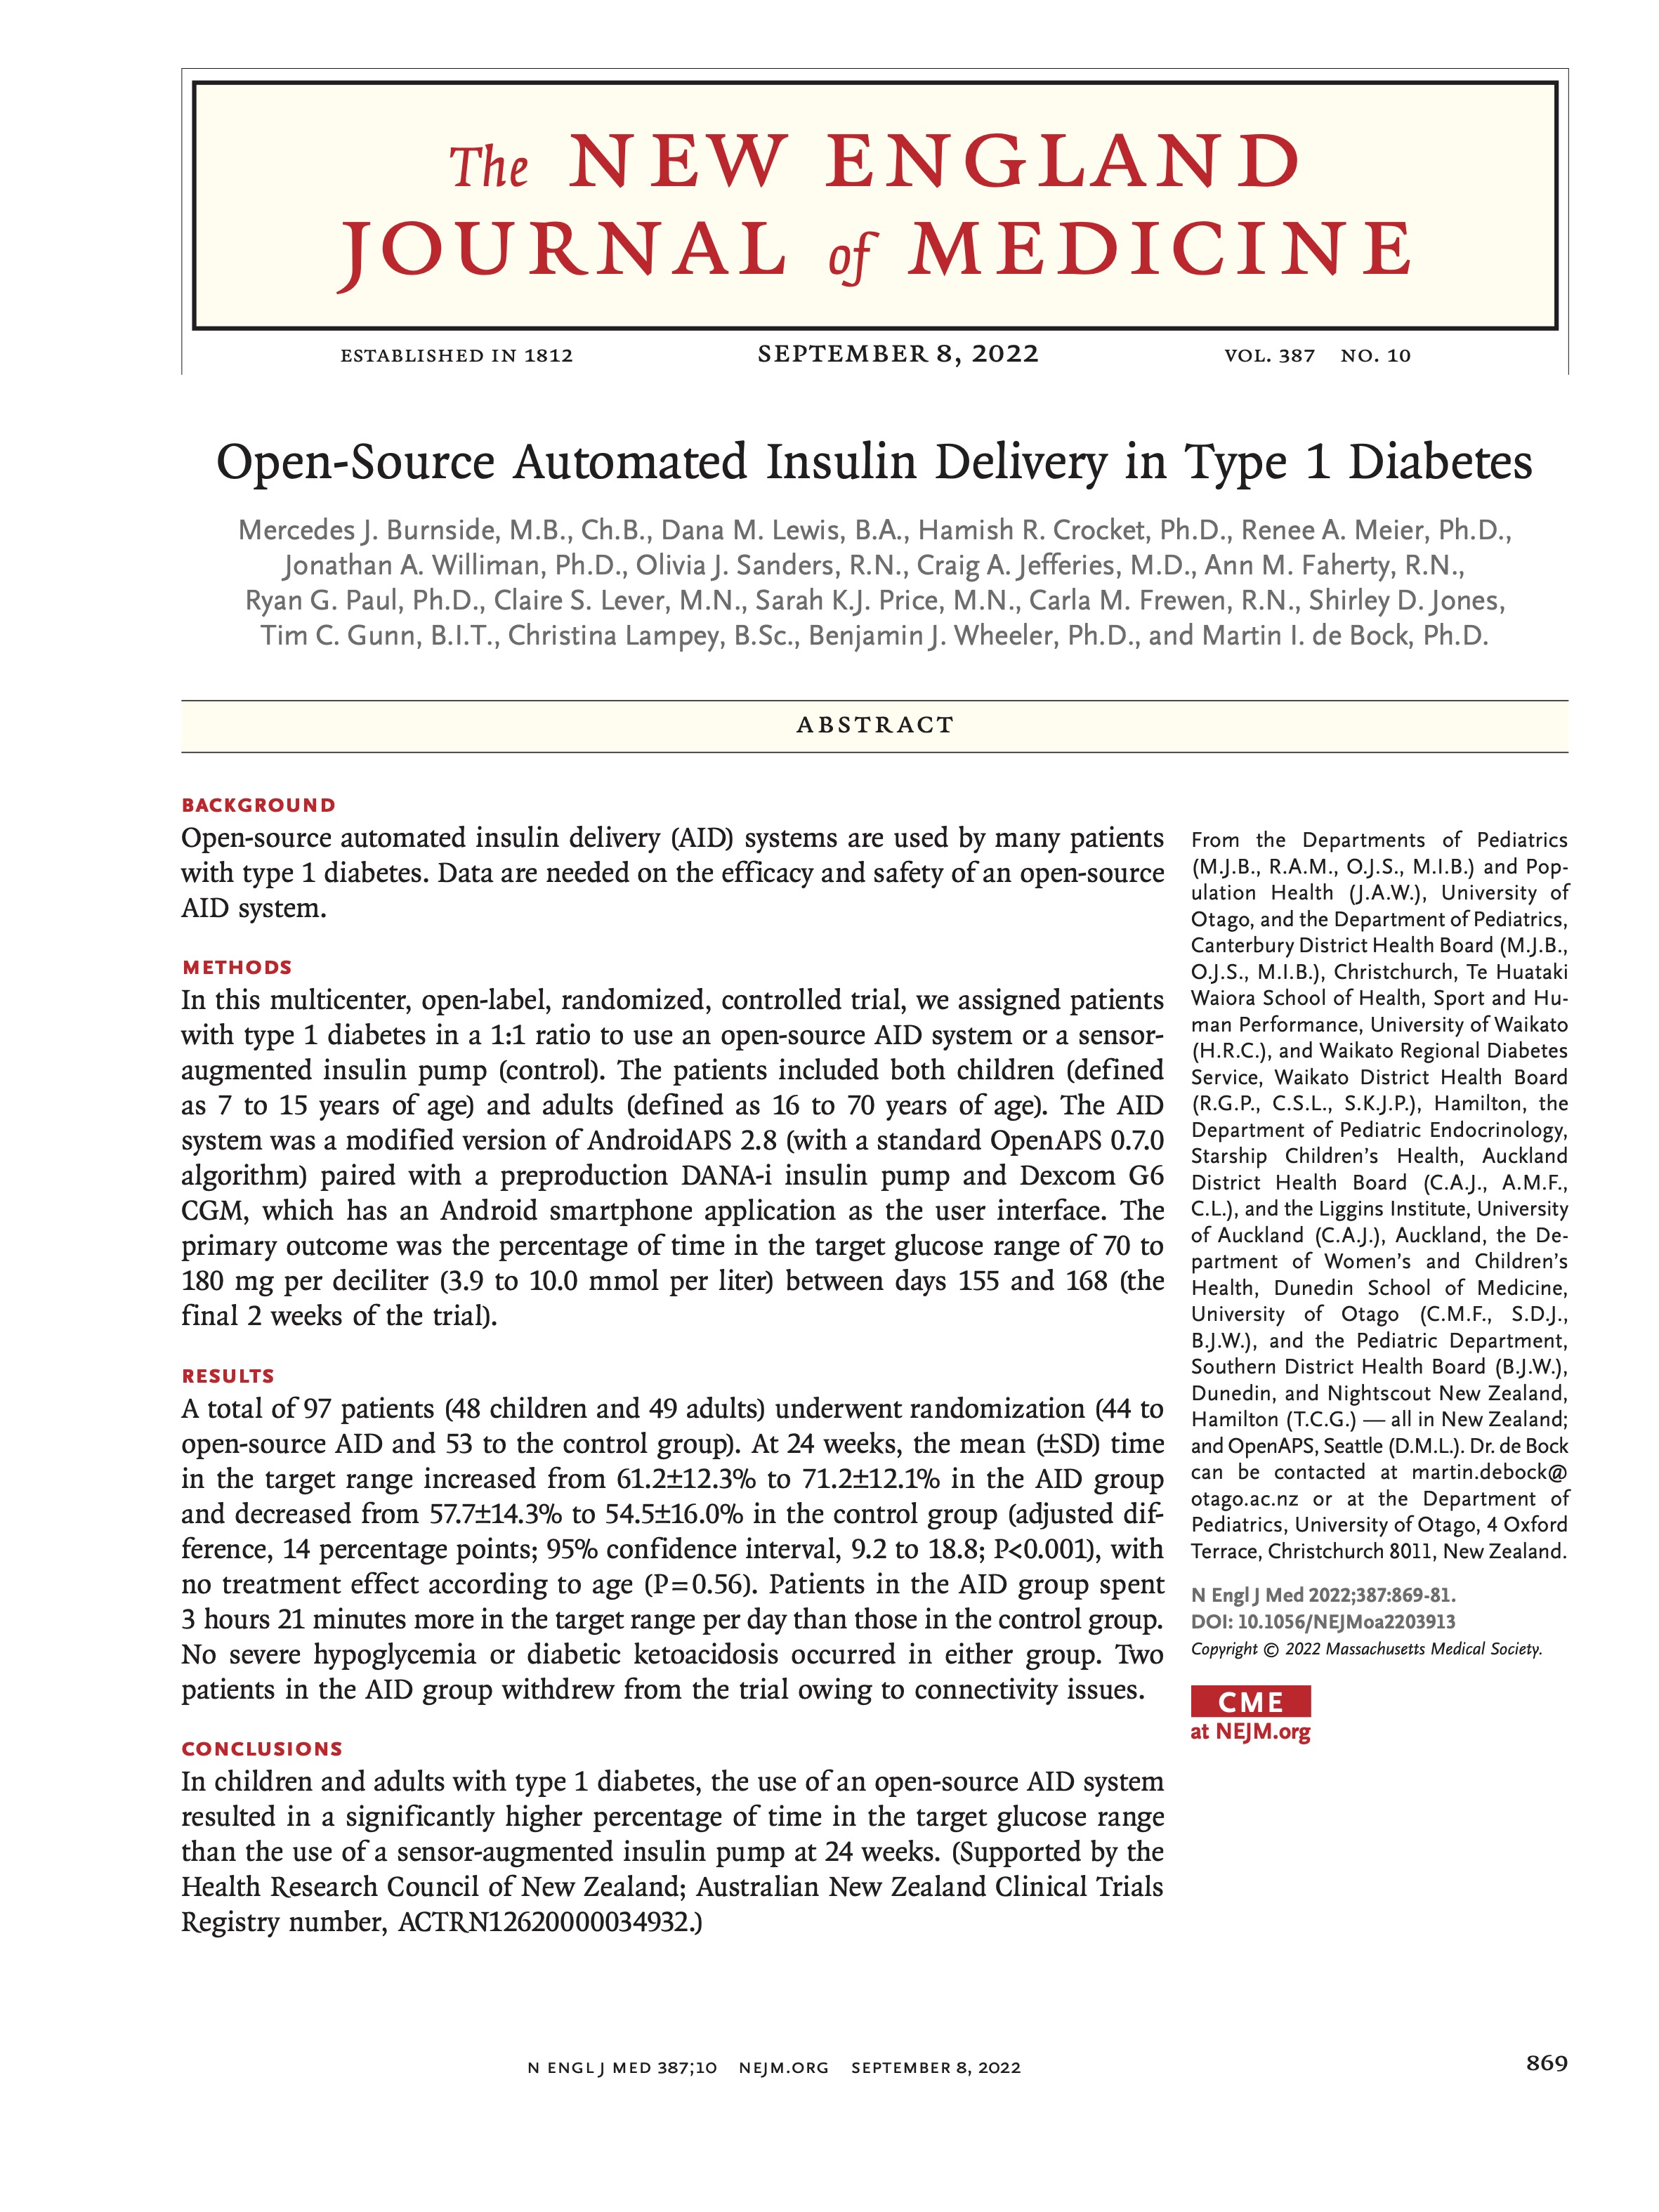 First page of NEJM article on Open Source AID in T1D, which contains the text of the abstract. 